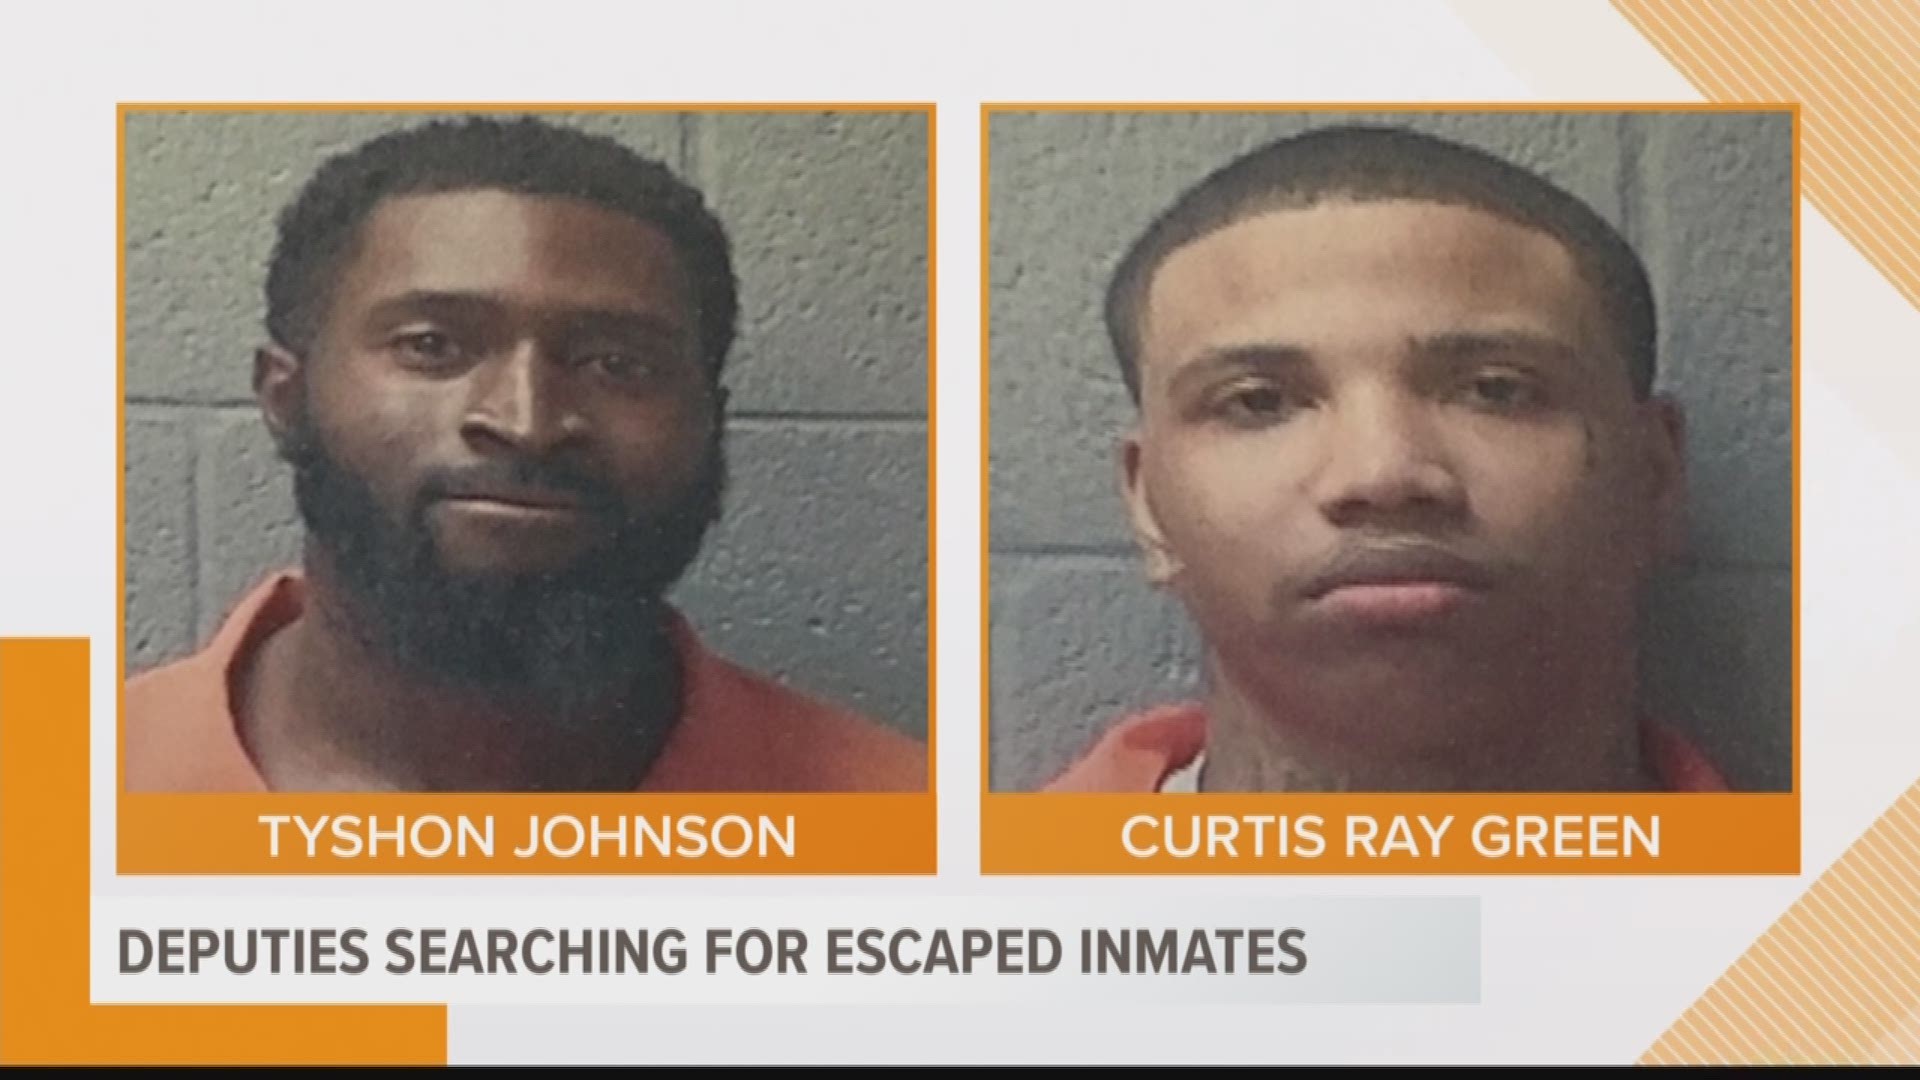 New details are emerging about the search for escaped inmates, the escape itself and the capture of one inmate in Lexington County. 